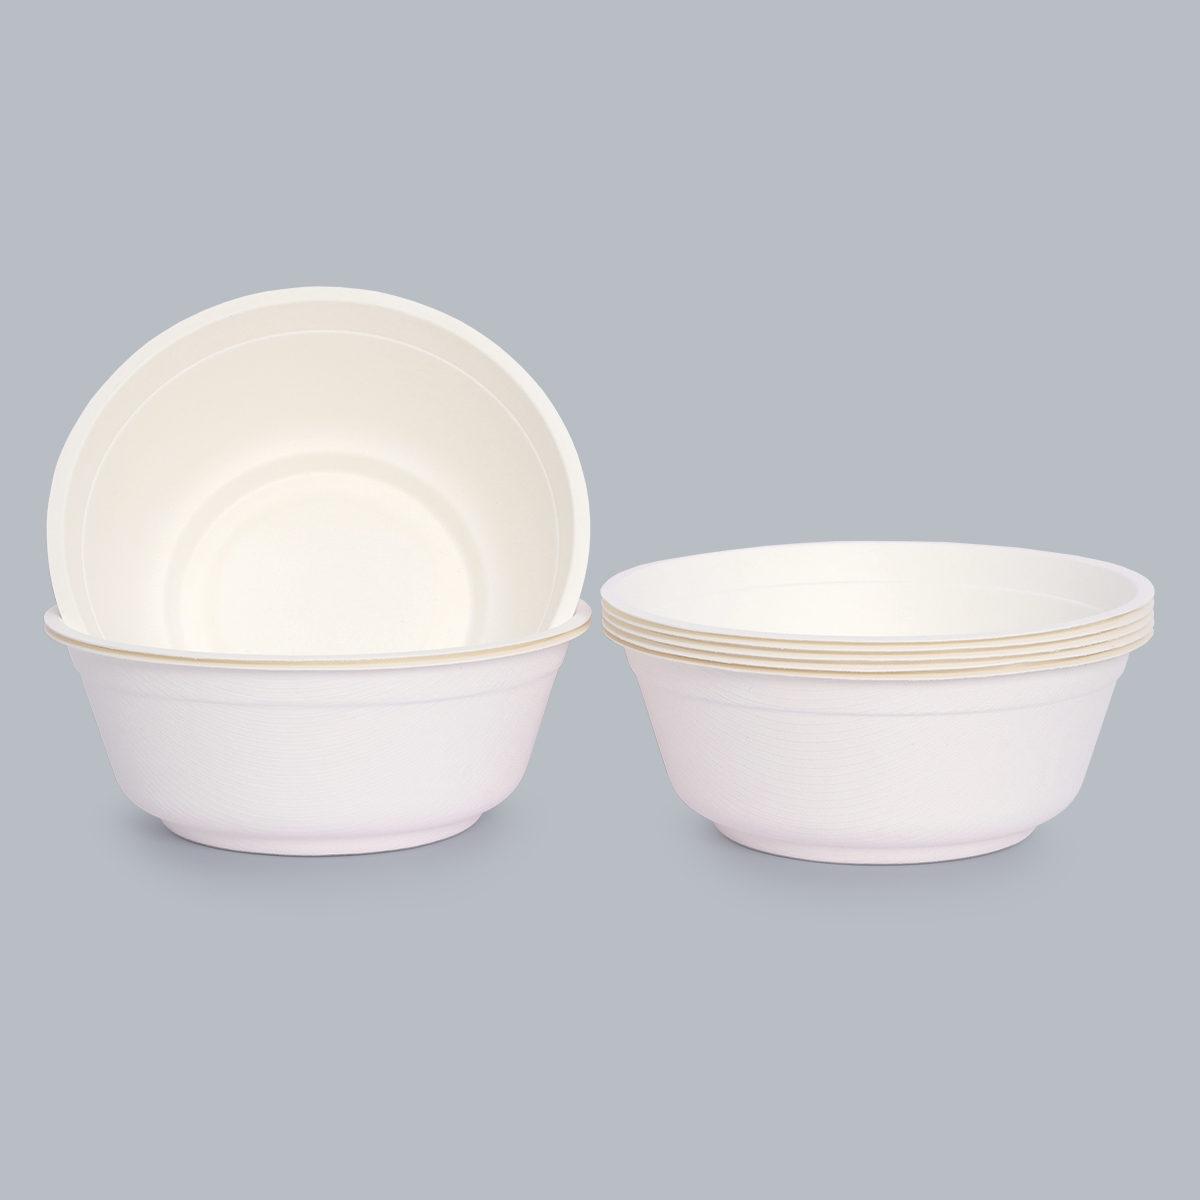 Green Paper Products Tableware 910ml Round Bowl Eco-Friendly Tableware